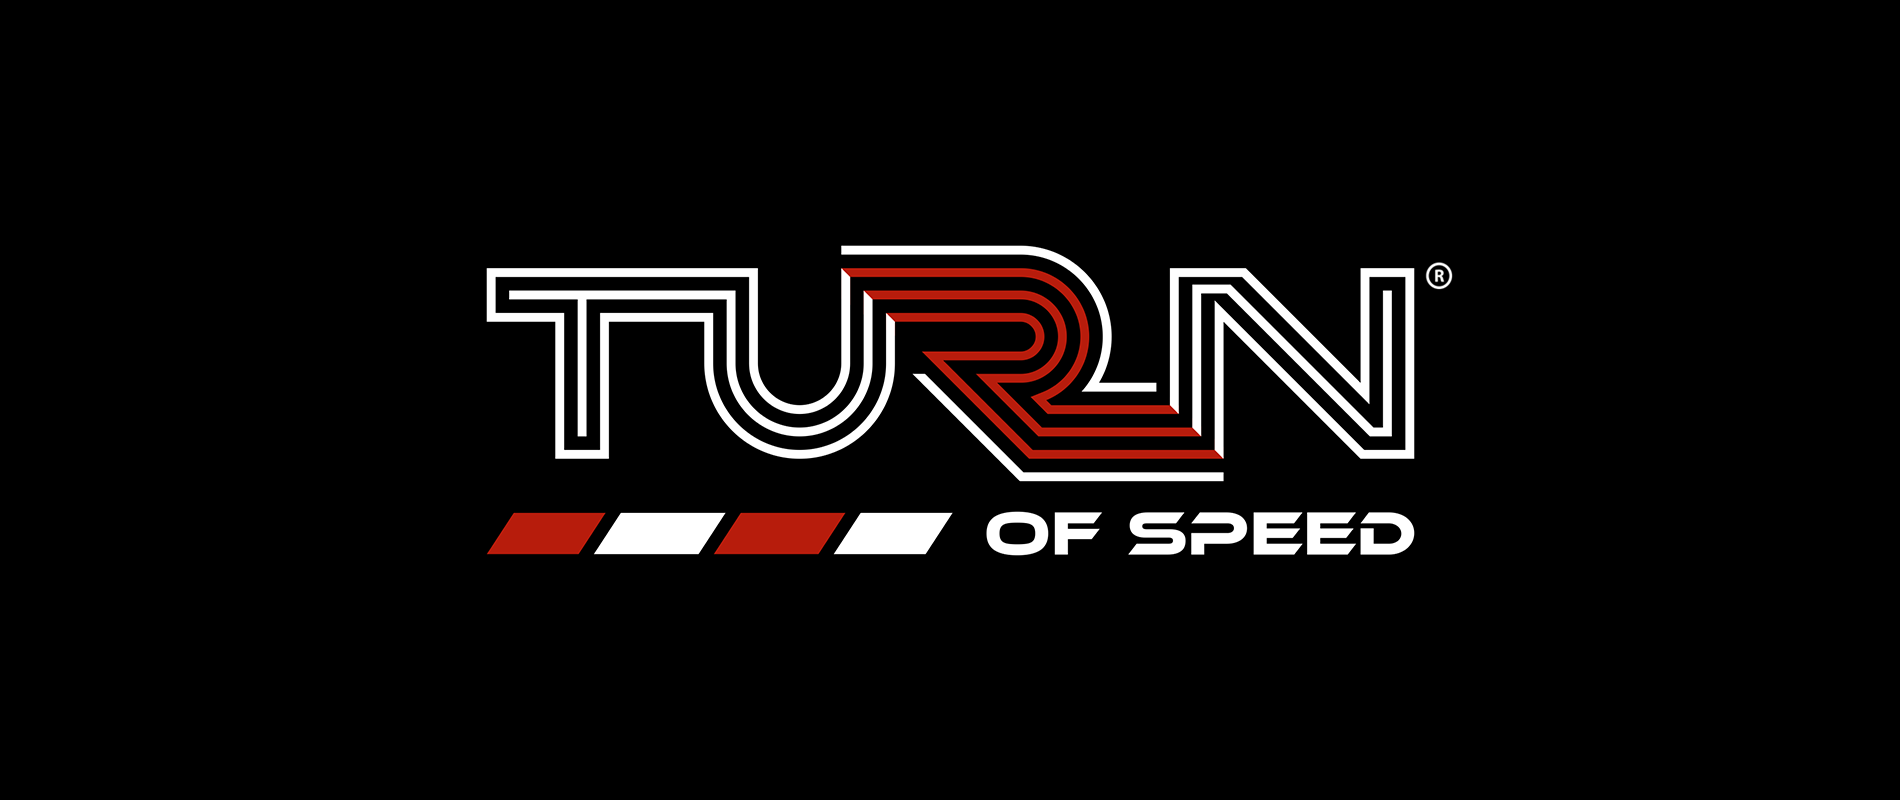 SEARCH  TURN OF SPEED